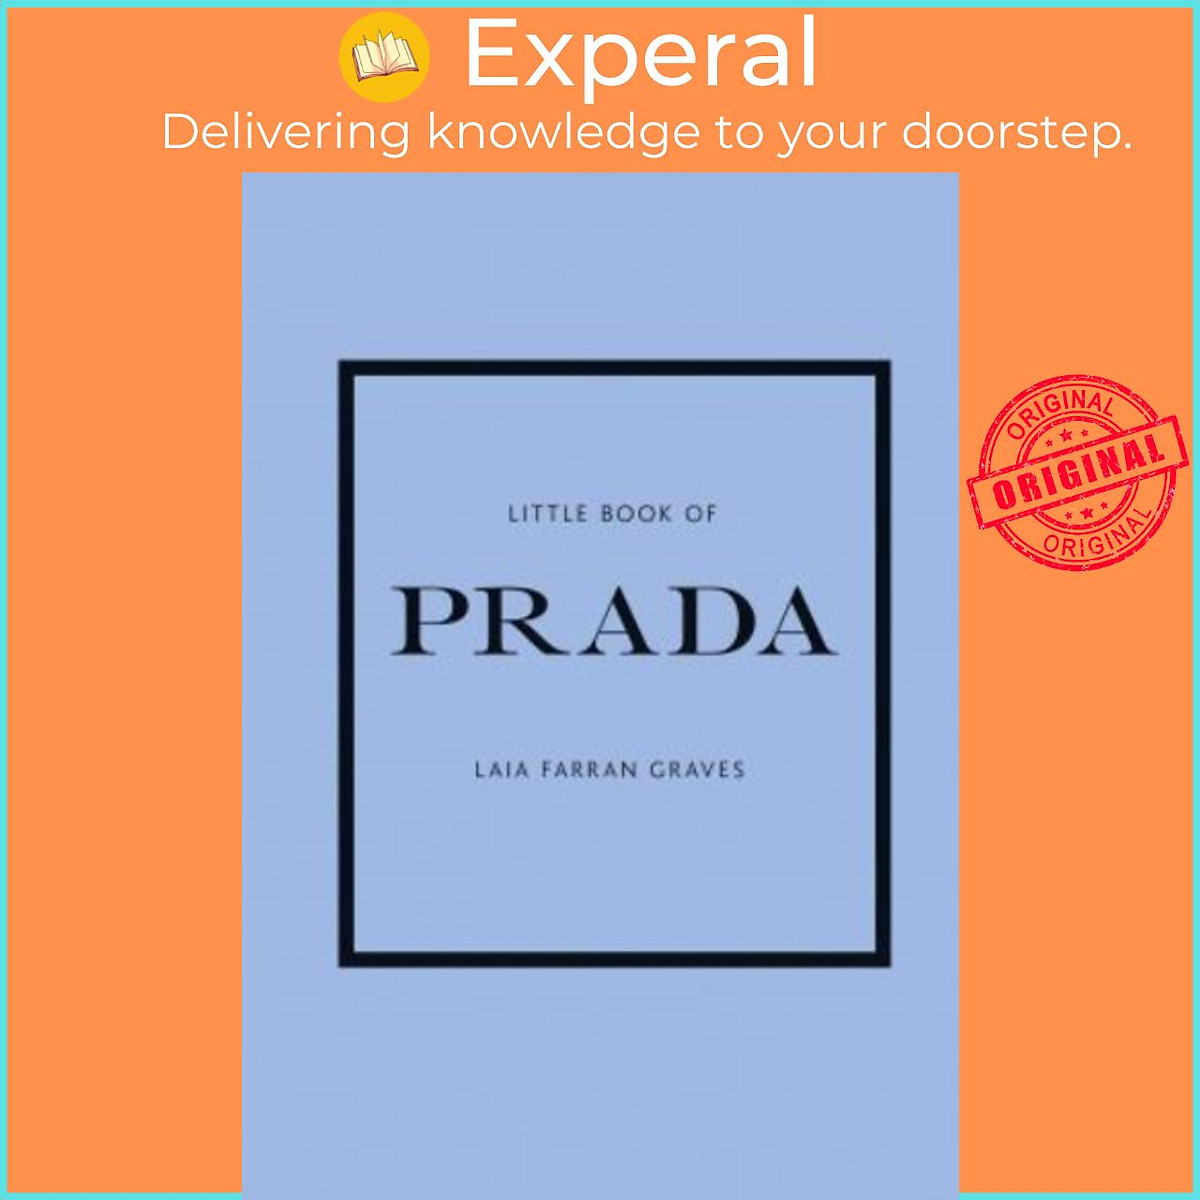 Sách - Little Book of Prada by Laia Farran Graves (UK edition, hardcover)